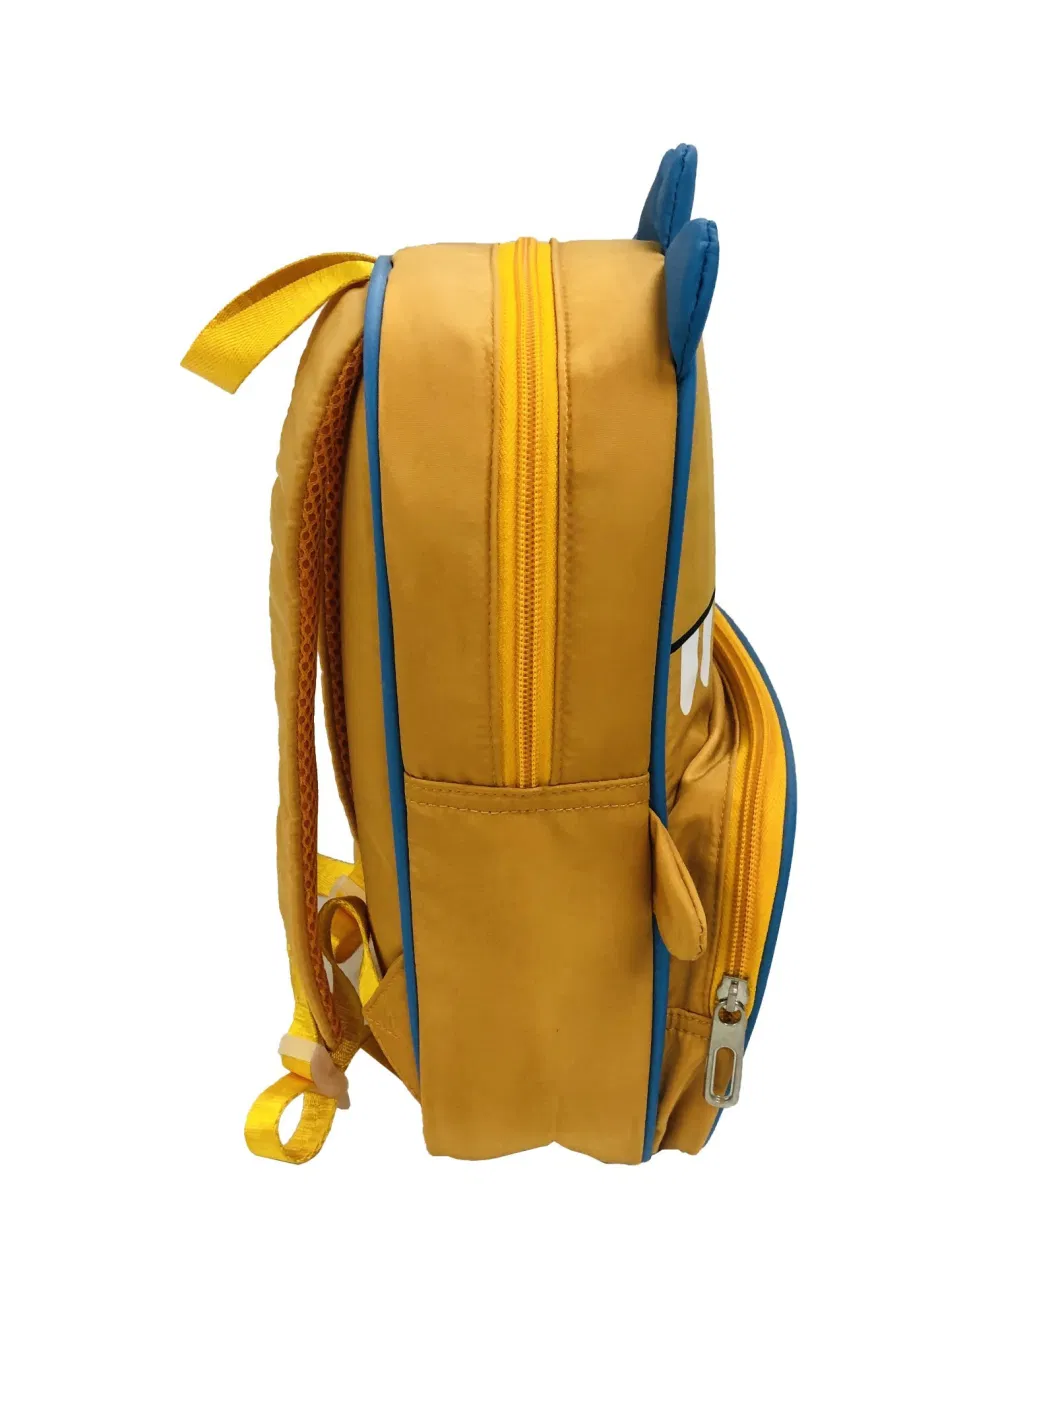 Kids Students School Bag Backpack for Boys &amp; Girls, Yellow Dinosaur, Padded Back &amp; Adjustable Strap, Perfect Size for for School &amp; Travel